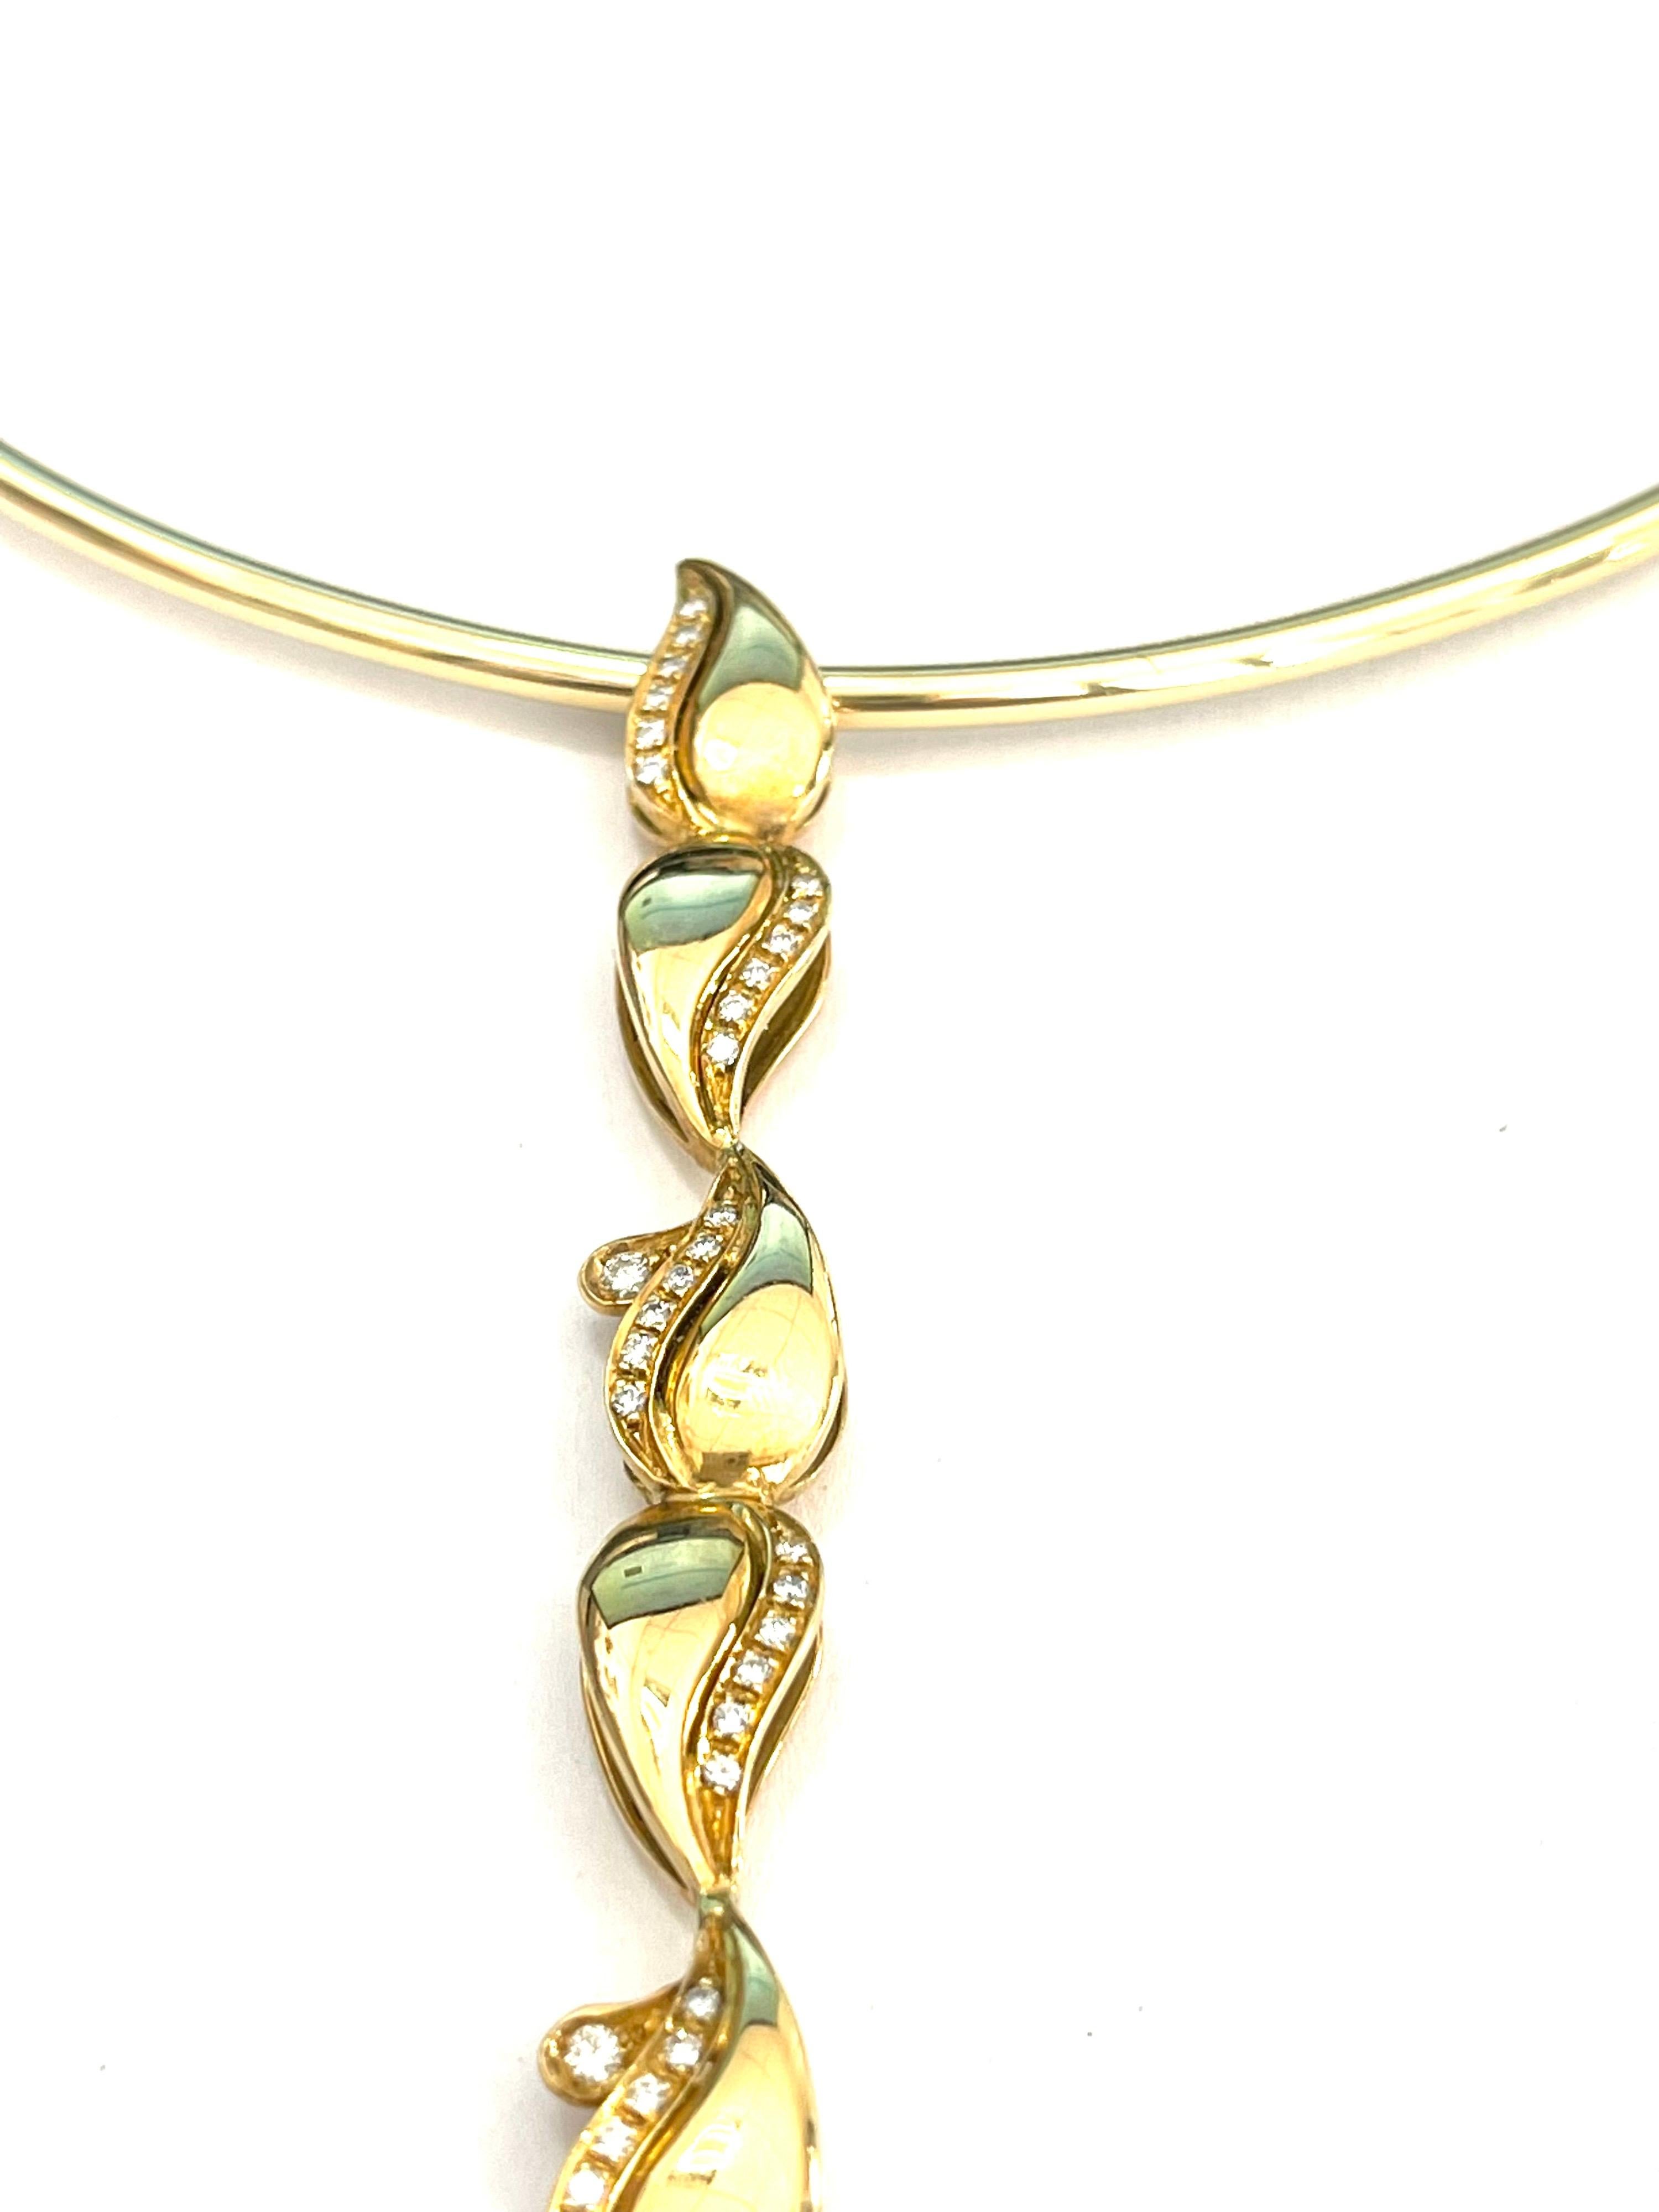 Very thin flexible Chocker that emphasizes the central pendant made of 18 kt yellow gold and white diamonds
The total weight of the gold is GR 20.8
The total weight of diamonds is CT 0.35

Stamp 10 MI 750
